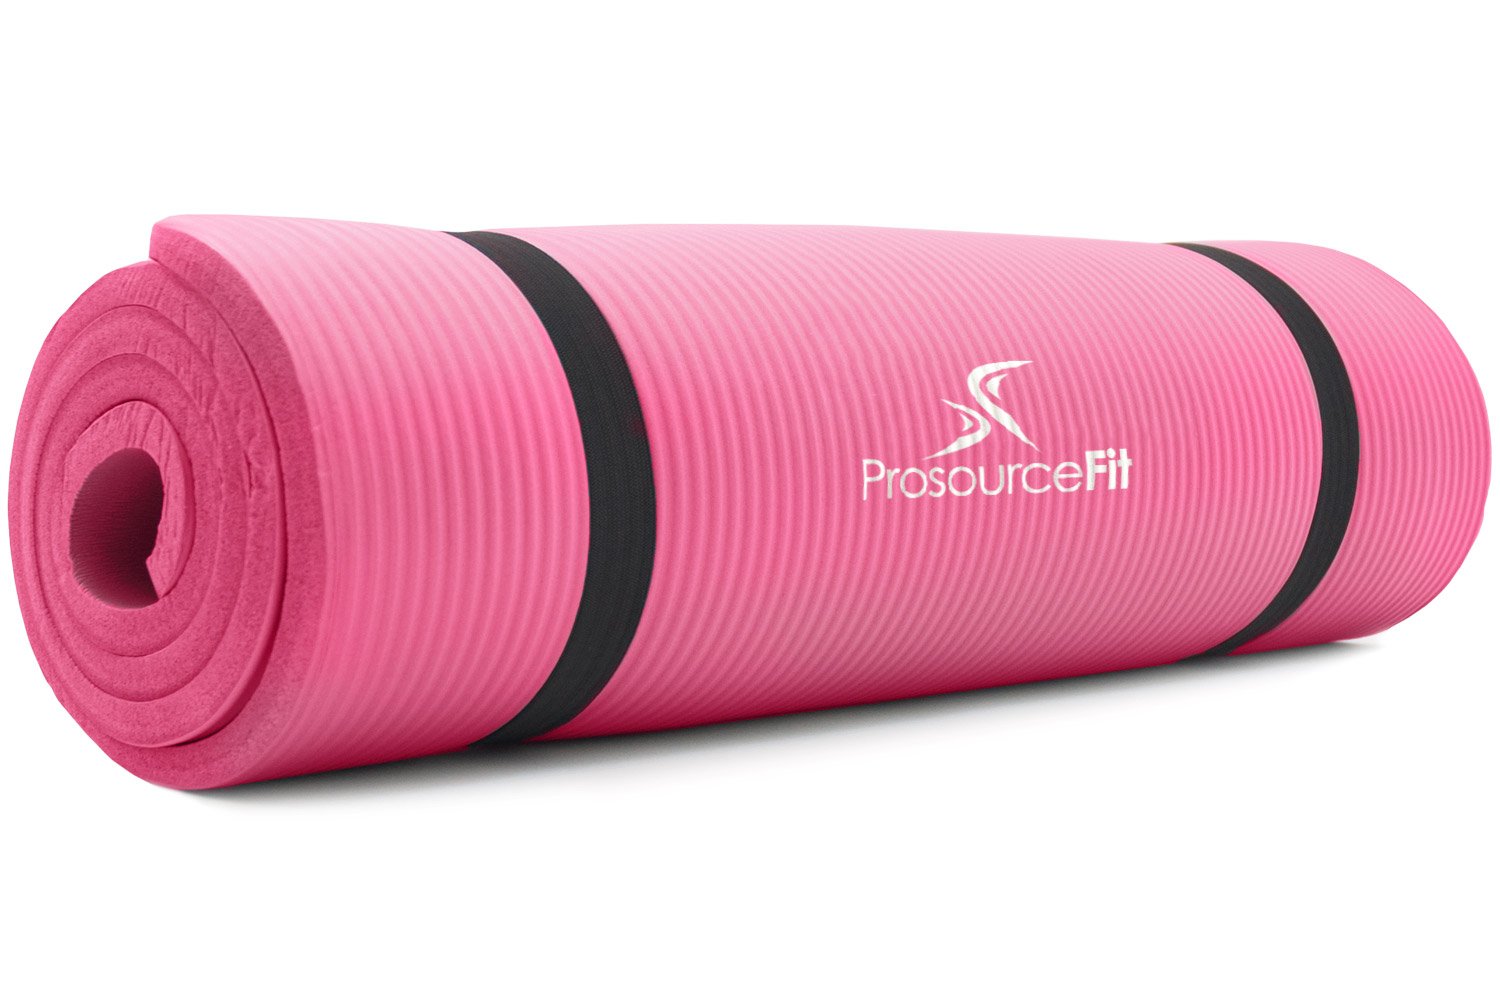  ProsourceFit Classic Yoga Mat 1/8” (3mm) Thick, Extra